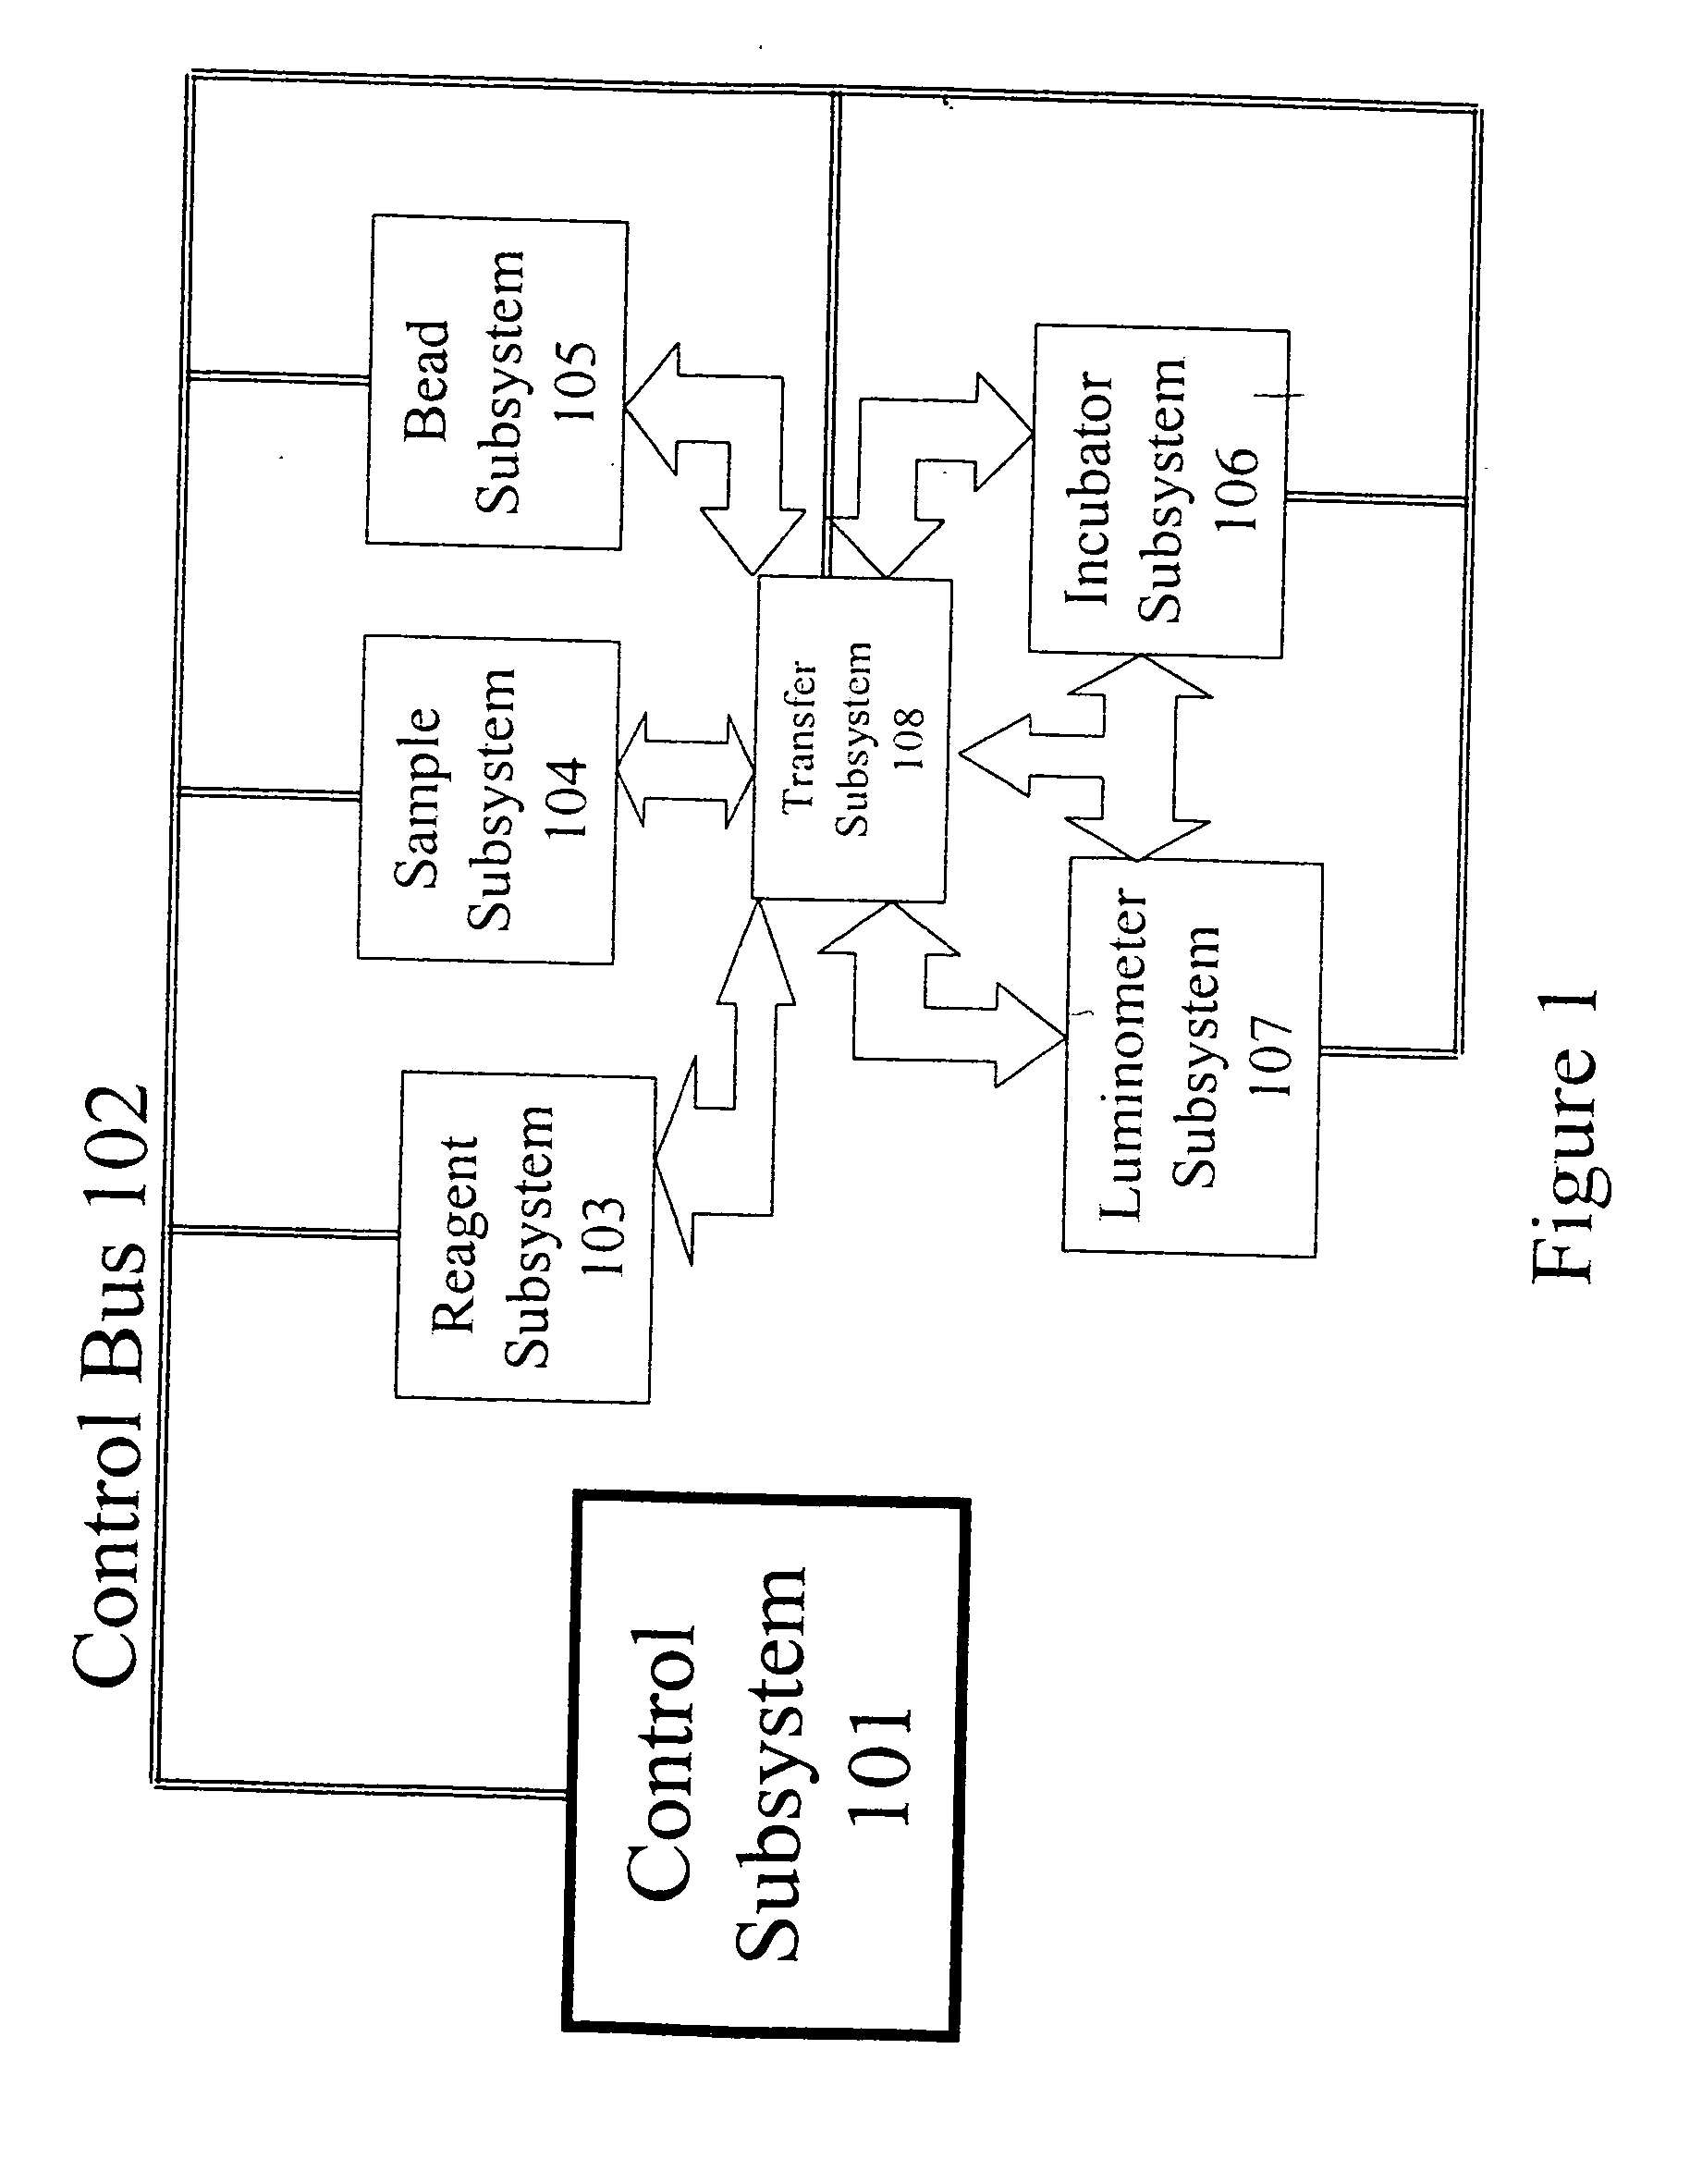 Multipath access system for use in an automated immunoassay analyzer